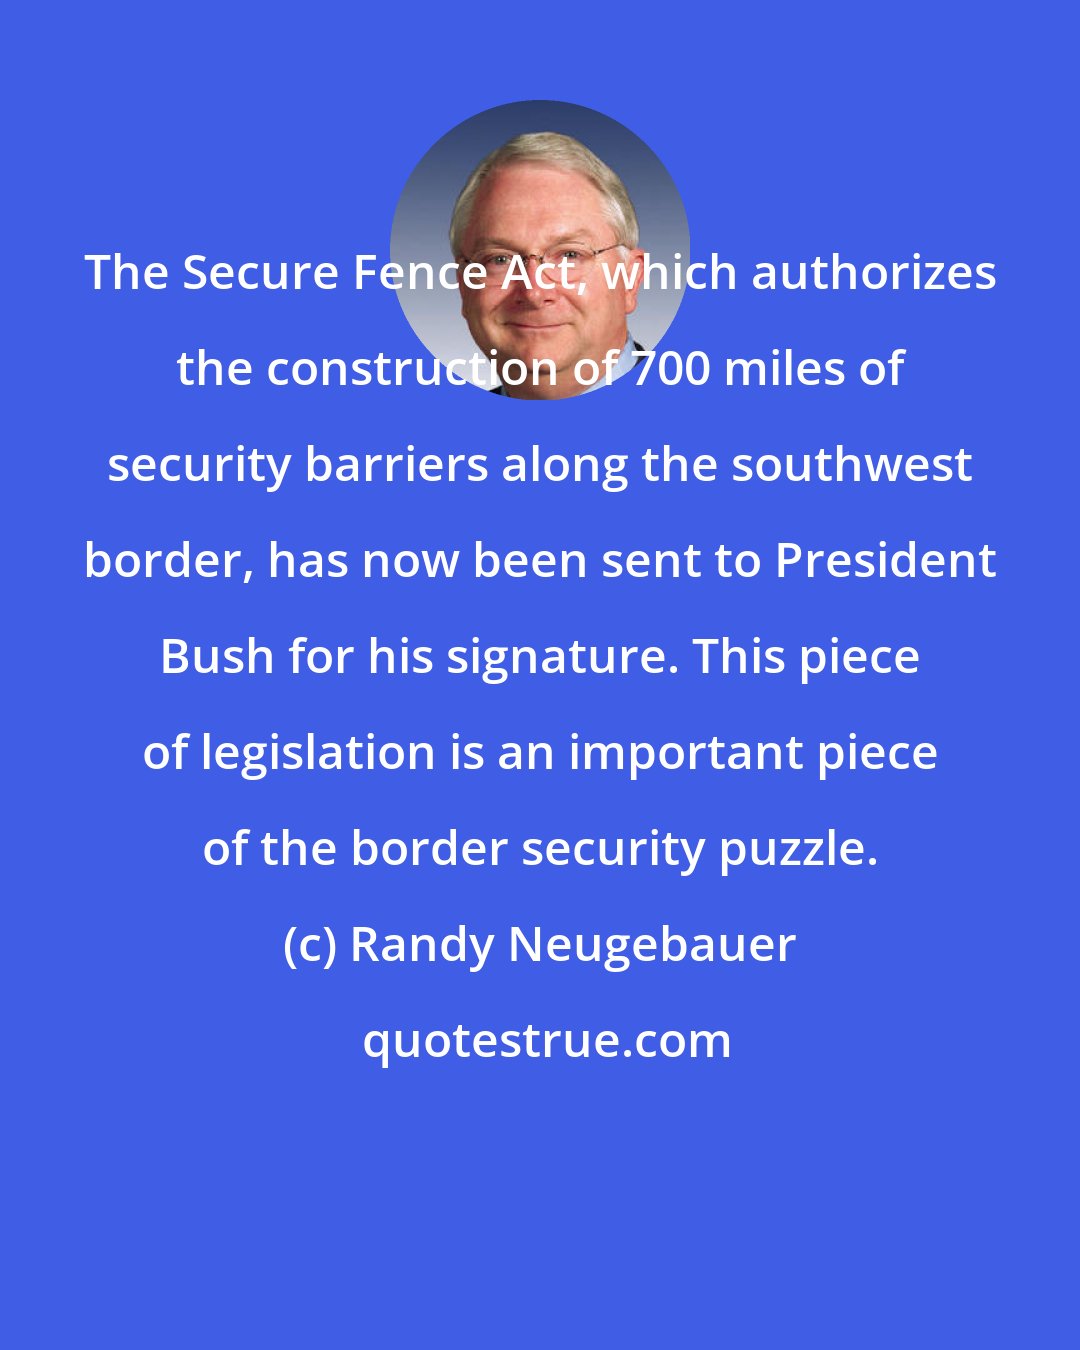 Randy Neugebauer: The Secure Fence Act, which authorizes the construction of 700 miles of security barriers along the southwest border, has now been sent to President Bush for his signature. This piece of legislation is an important piece of the border security puzzle.